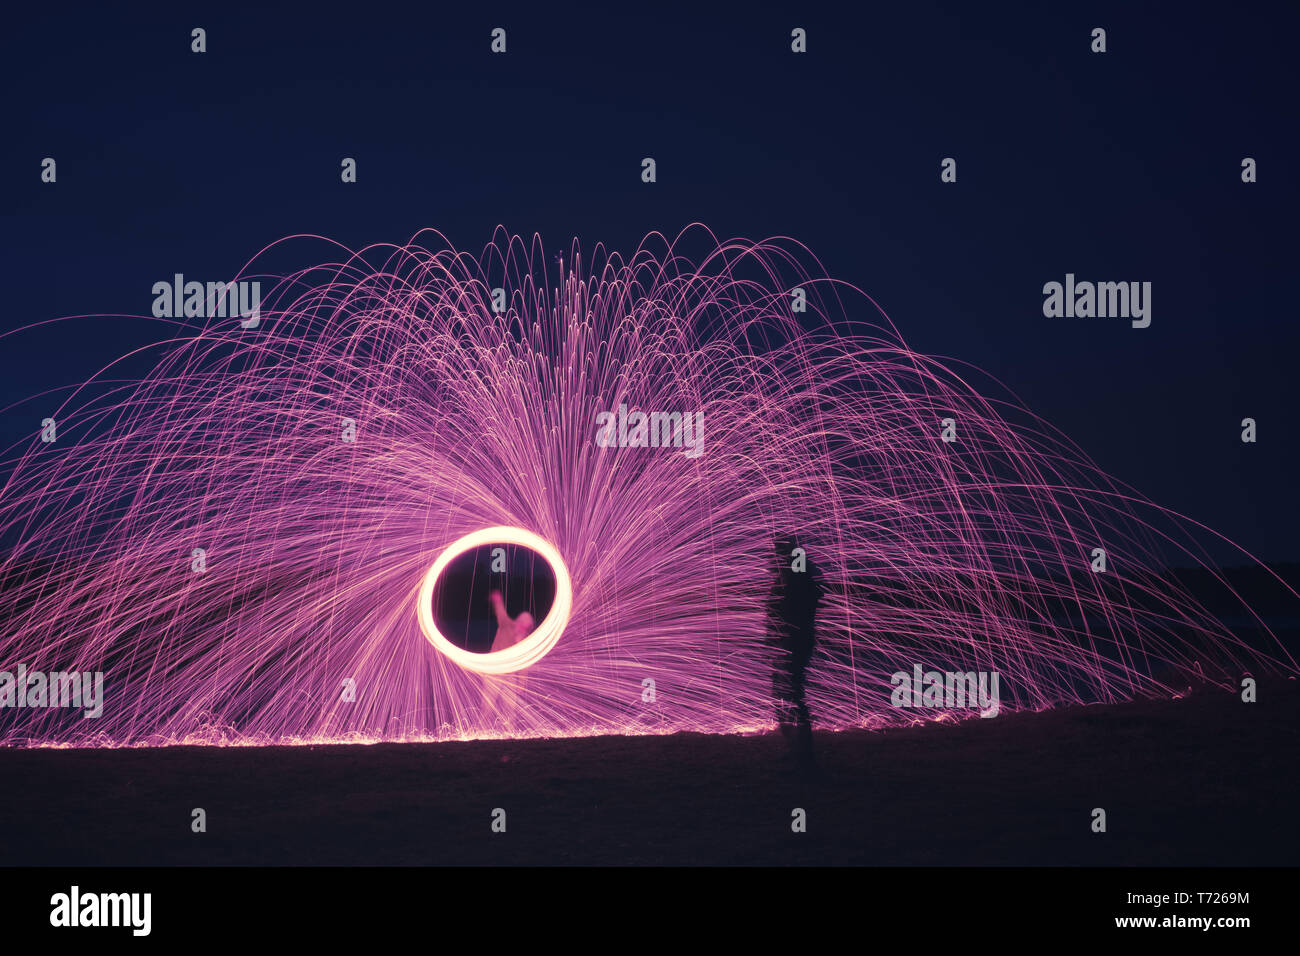 steel wool firework with shadow of a man Stock Photo